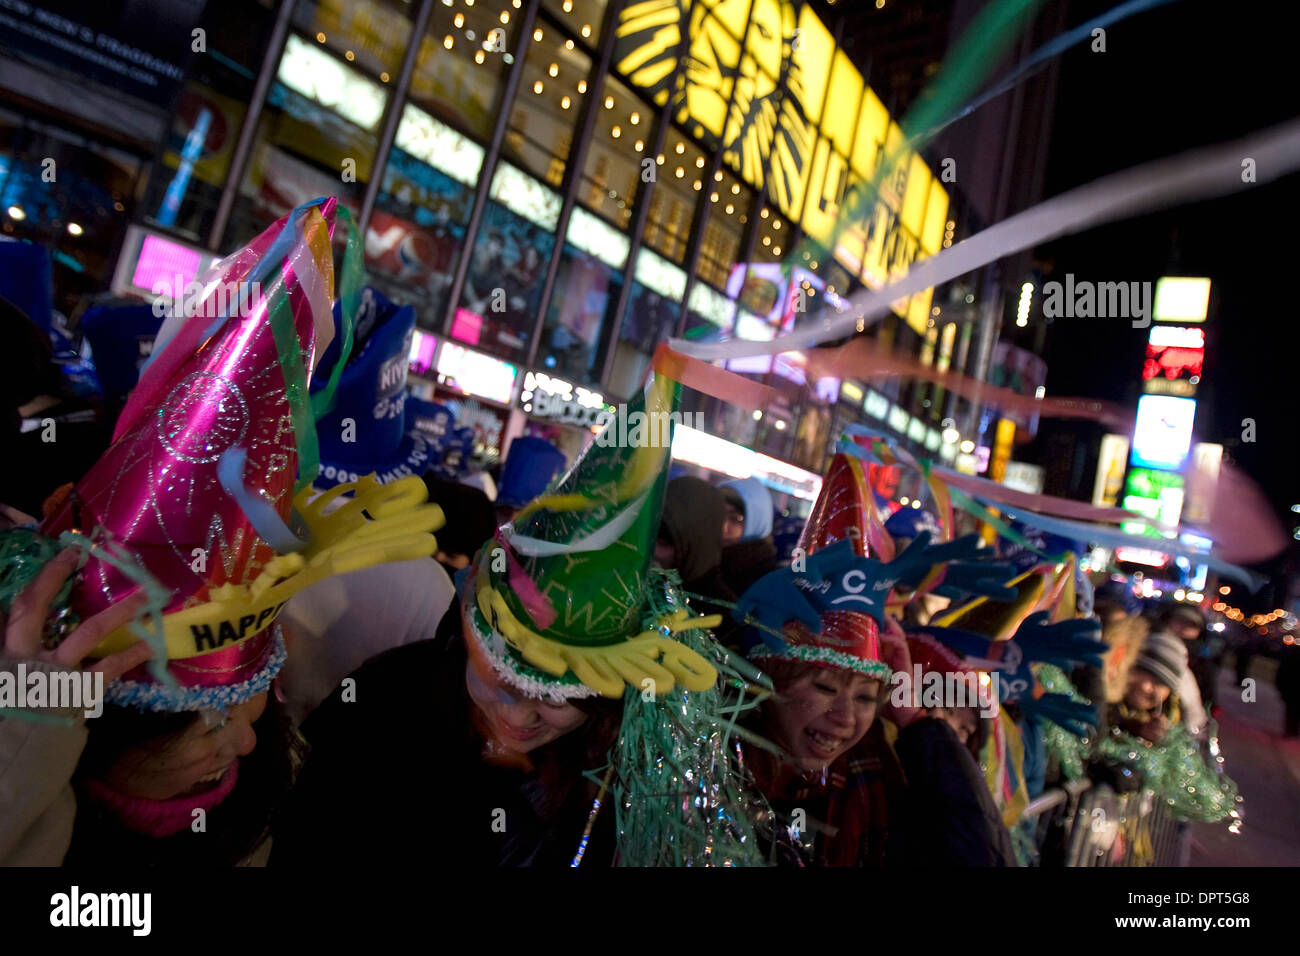 Dec 31, 2008 - New York, New York, USA - Revellers take part in the New Year's Eve festivities in New York's Times Square. (Credit Image: © Mehmet Demirci/ZUMA Press) Stock Photo